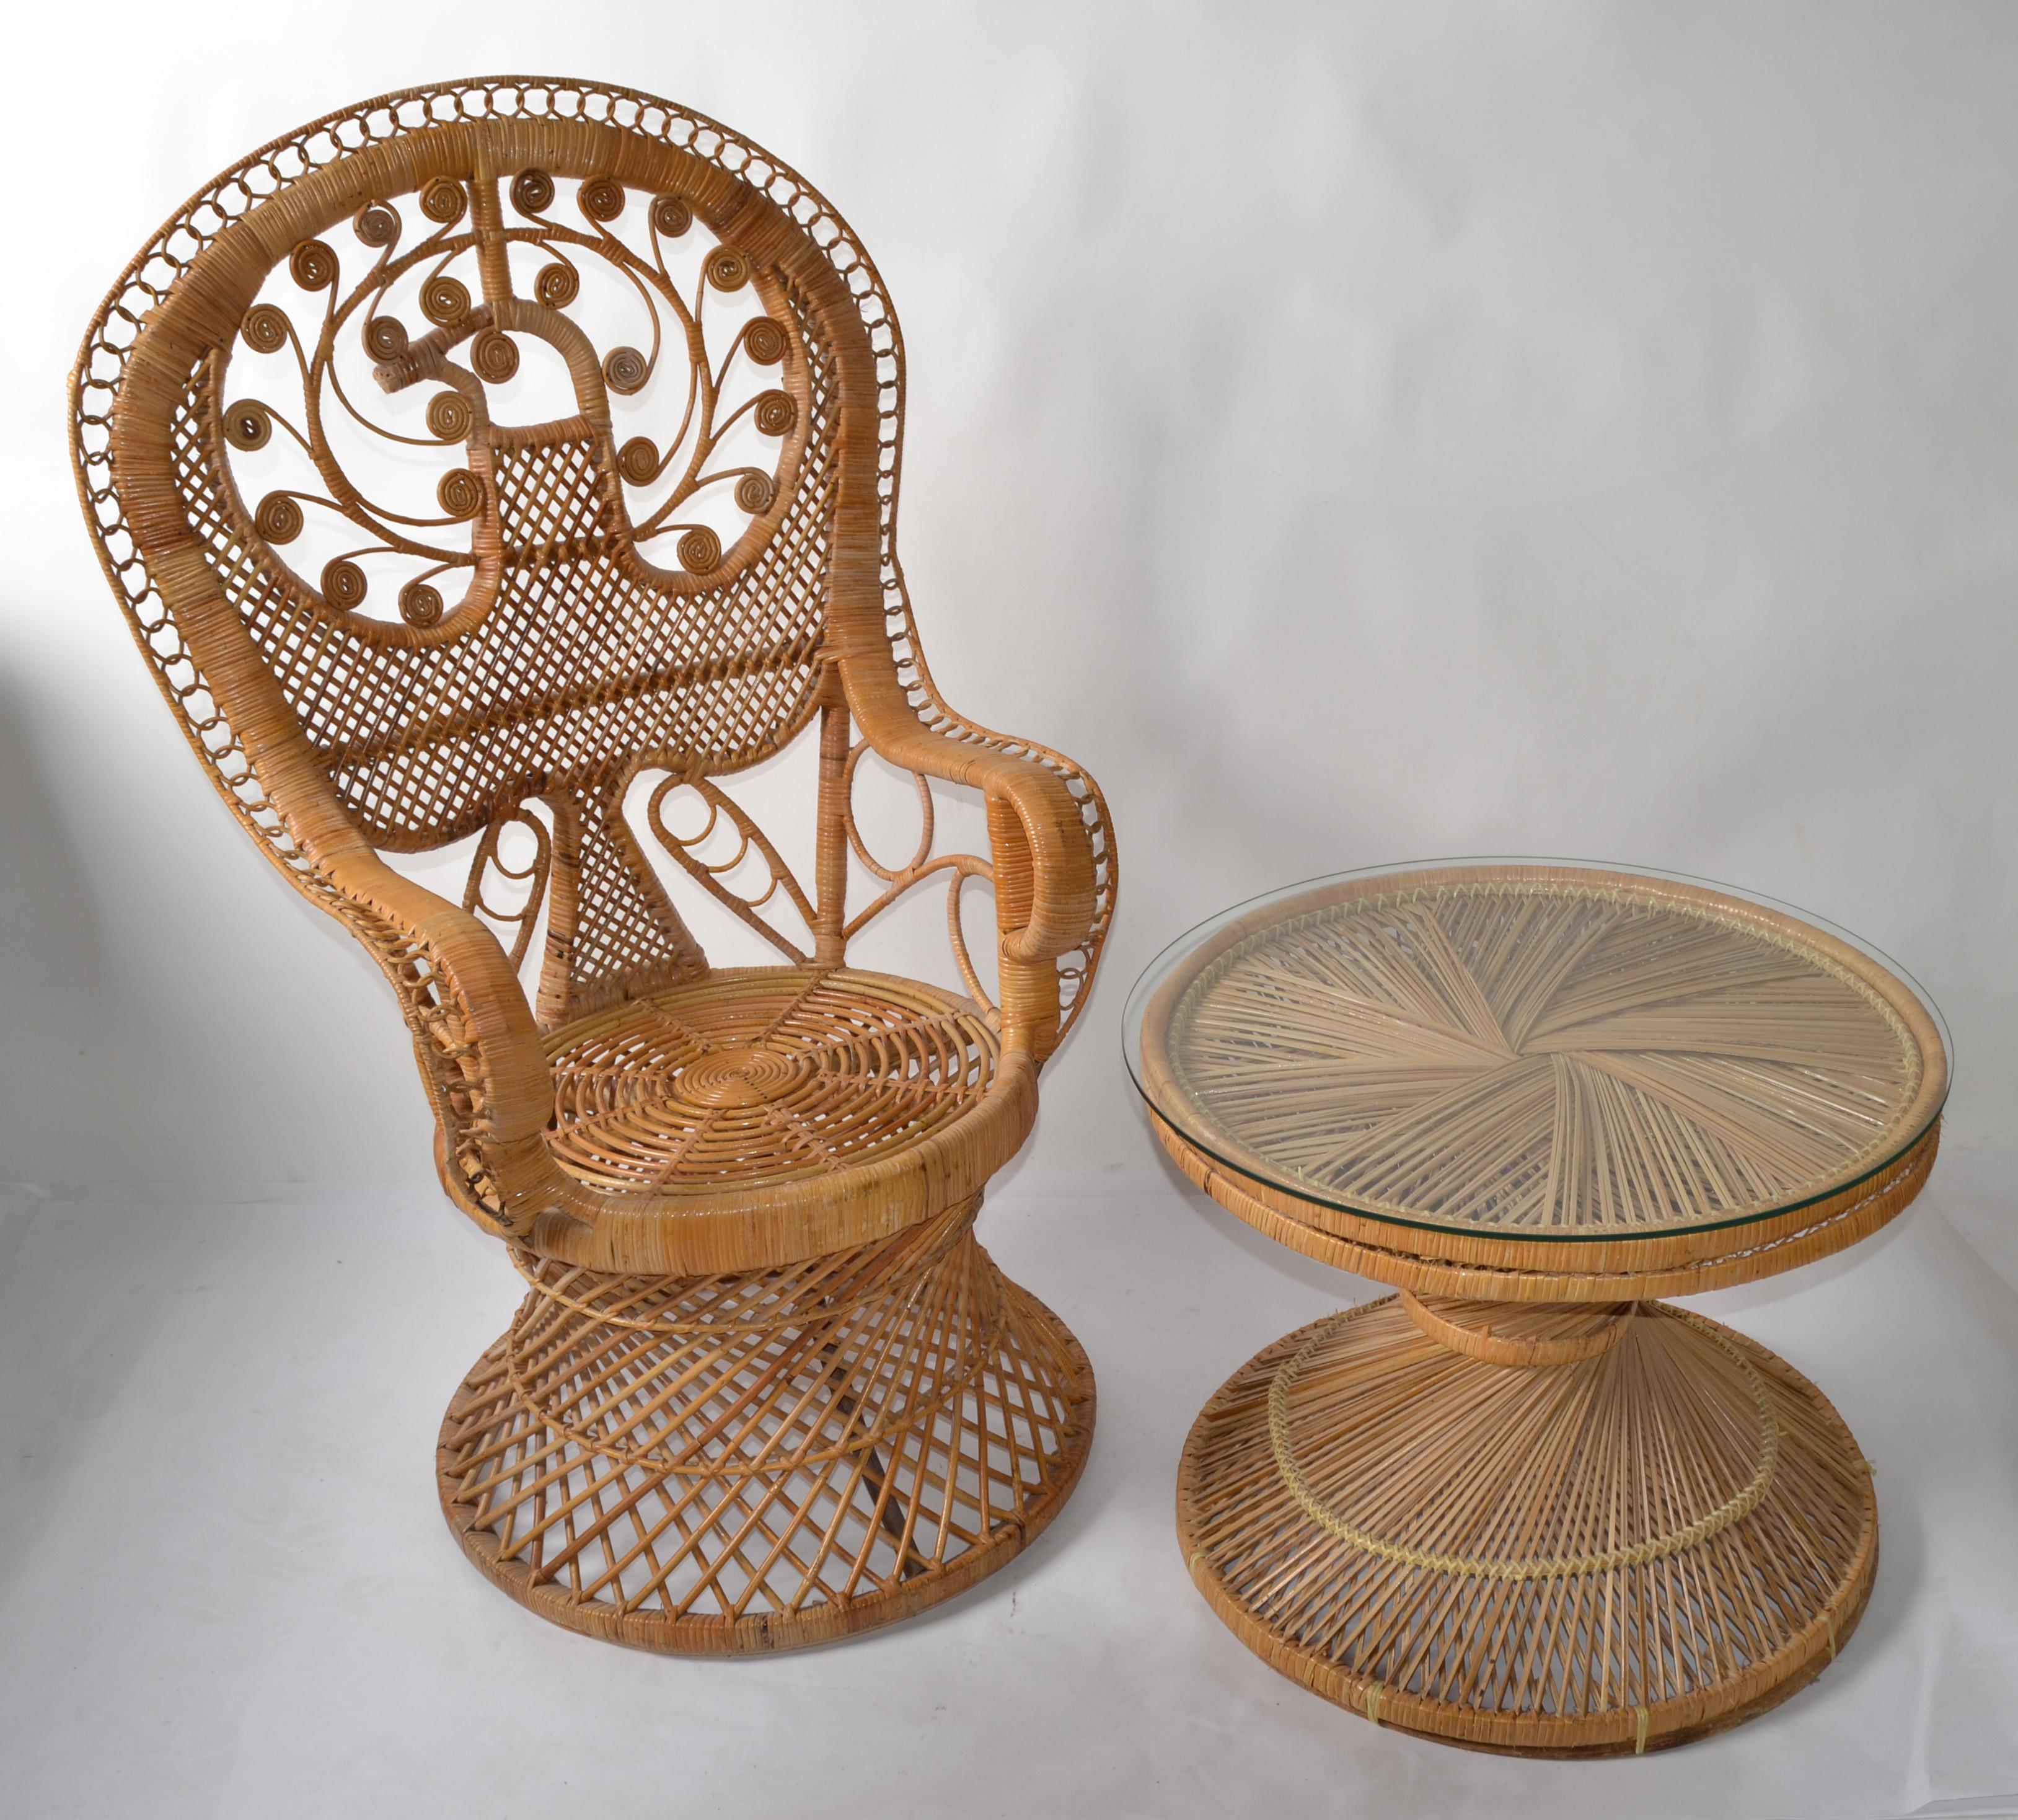 Coastal Vintage Round Rattan Accent Table Hand-Woven Wicker Caning Peacock Chair en vente 6